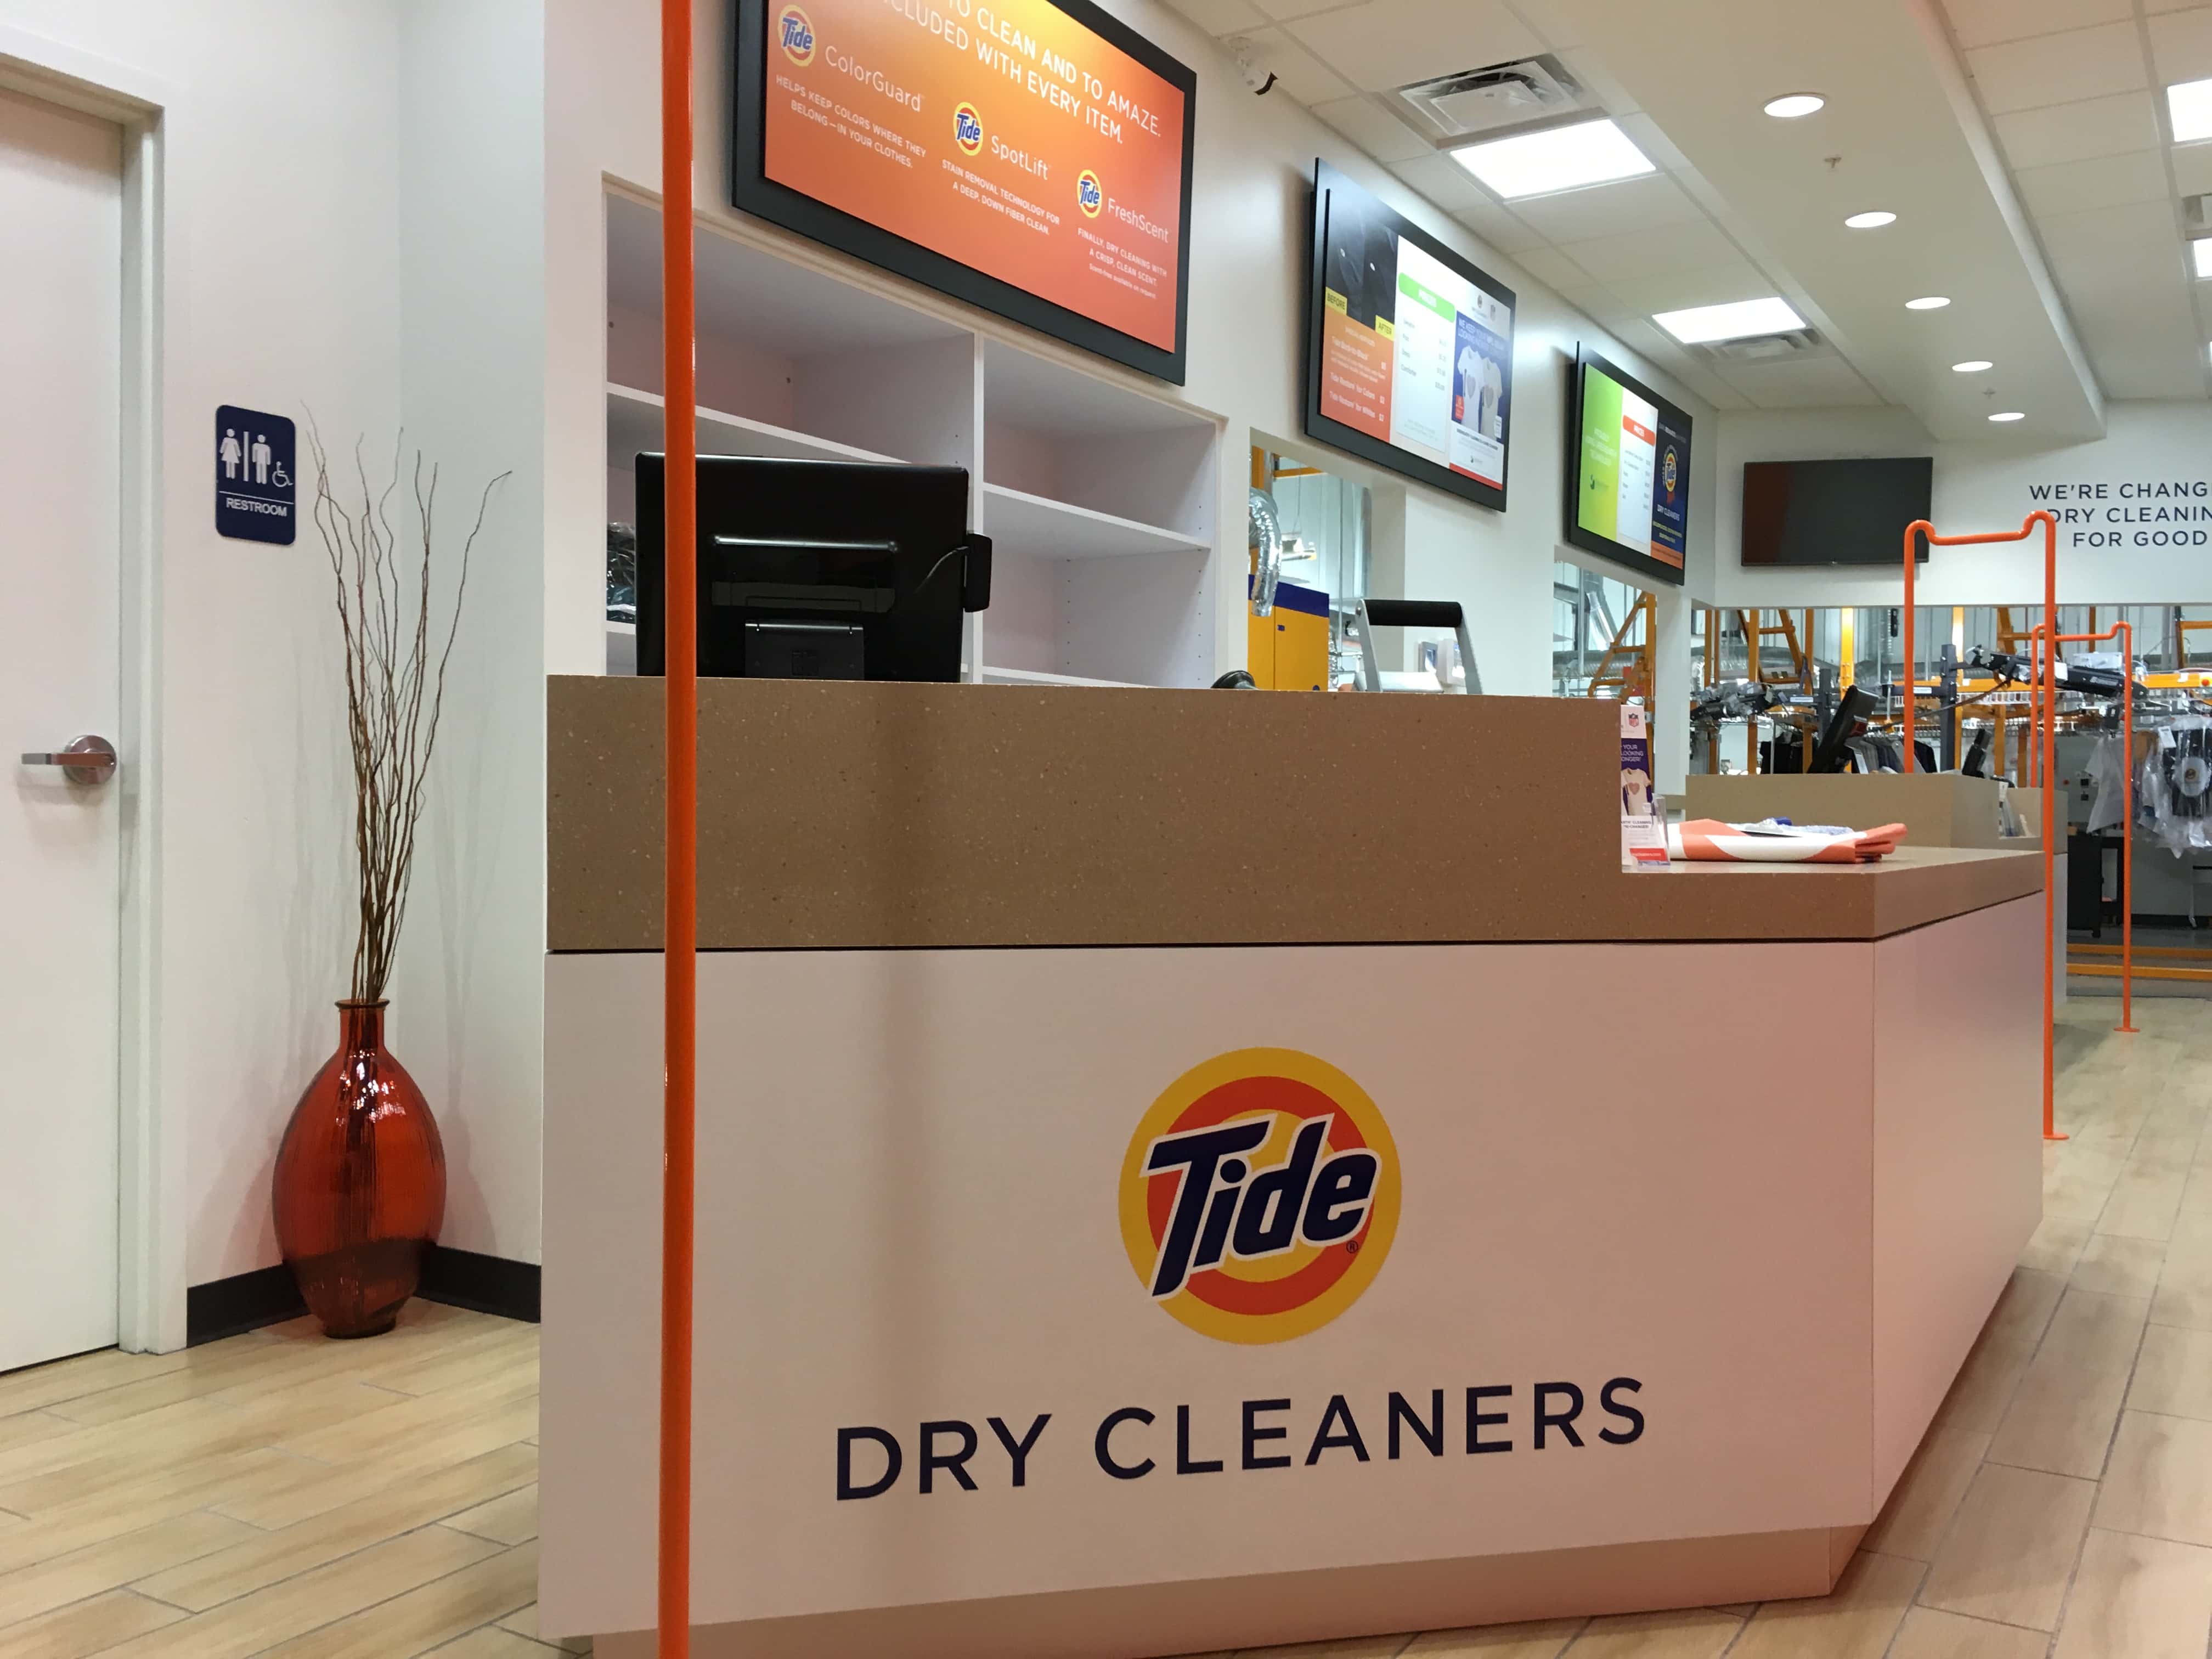 Tide Cleaners - Wellington (FL 33414), US, dry cleaners near me